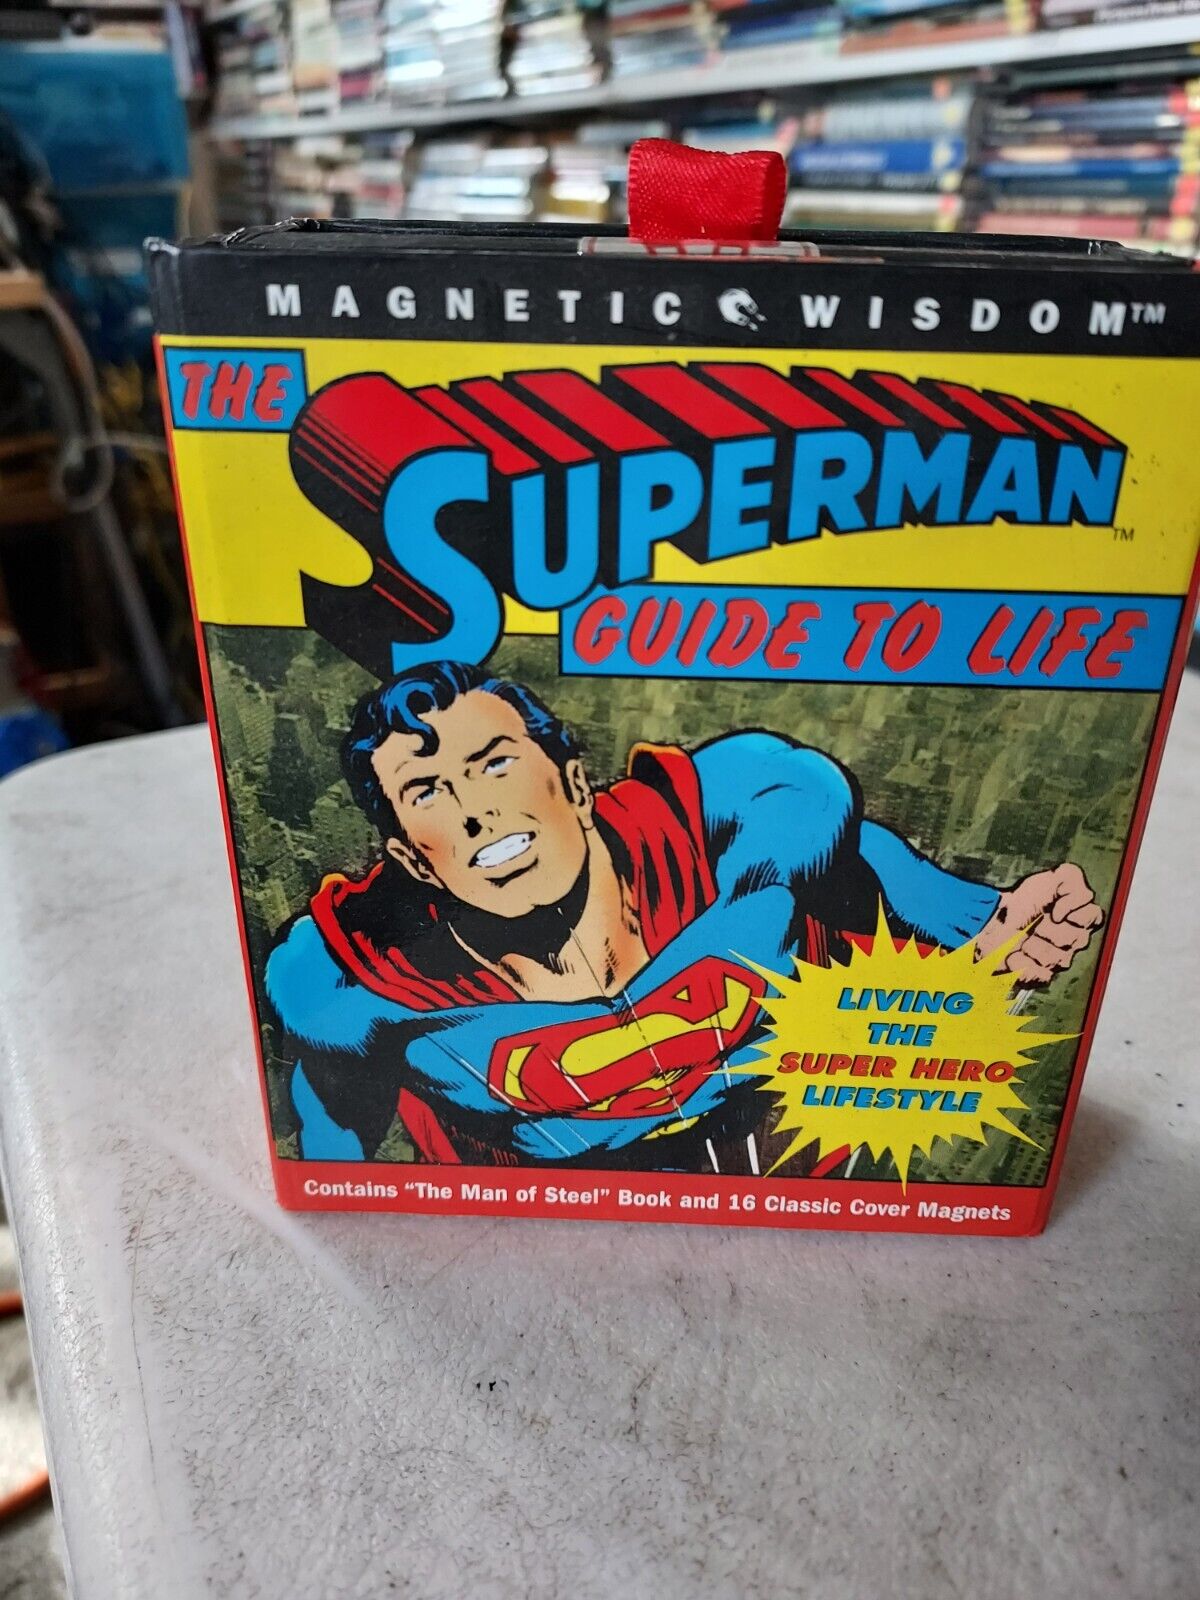 The Superman Guide to Life: Living the Super Hero Lifestyle -Magnetic Wisdom H2A